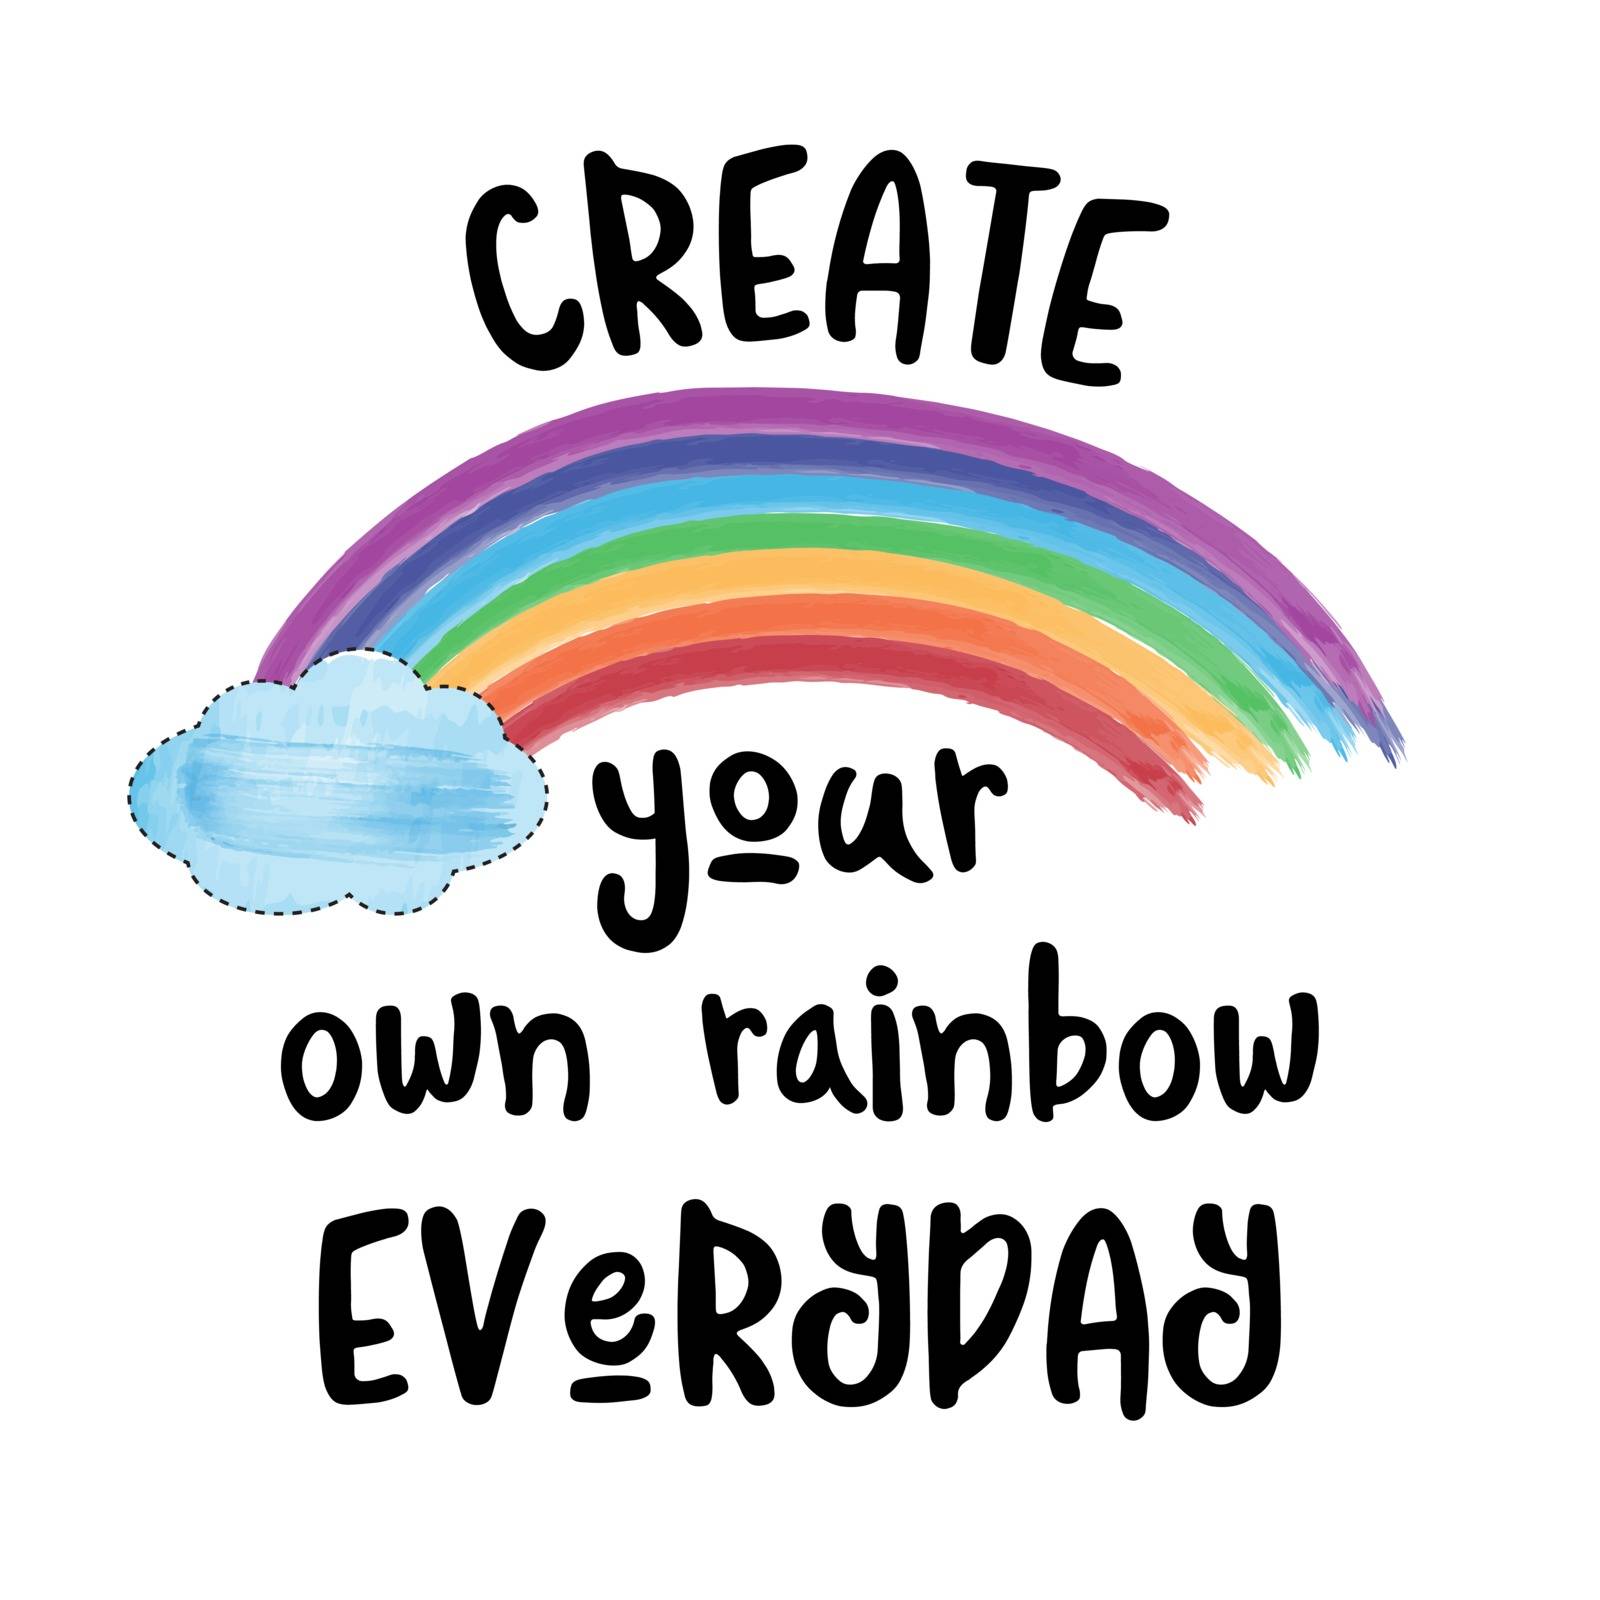 beautiful modern inspirational quote with rainbow